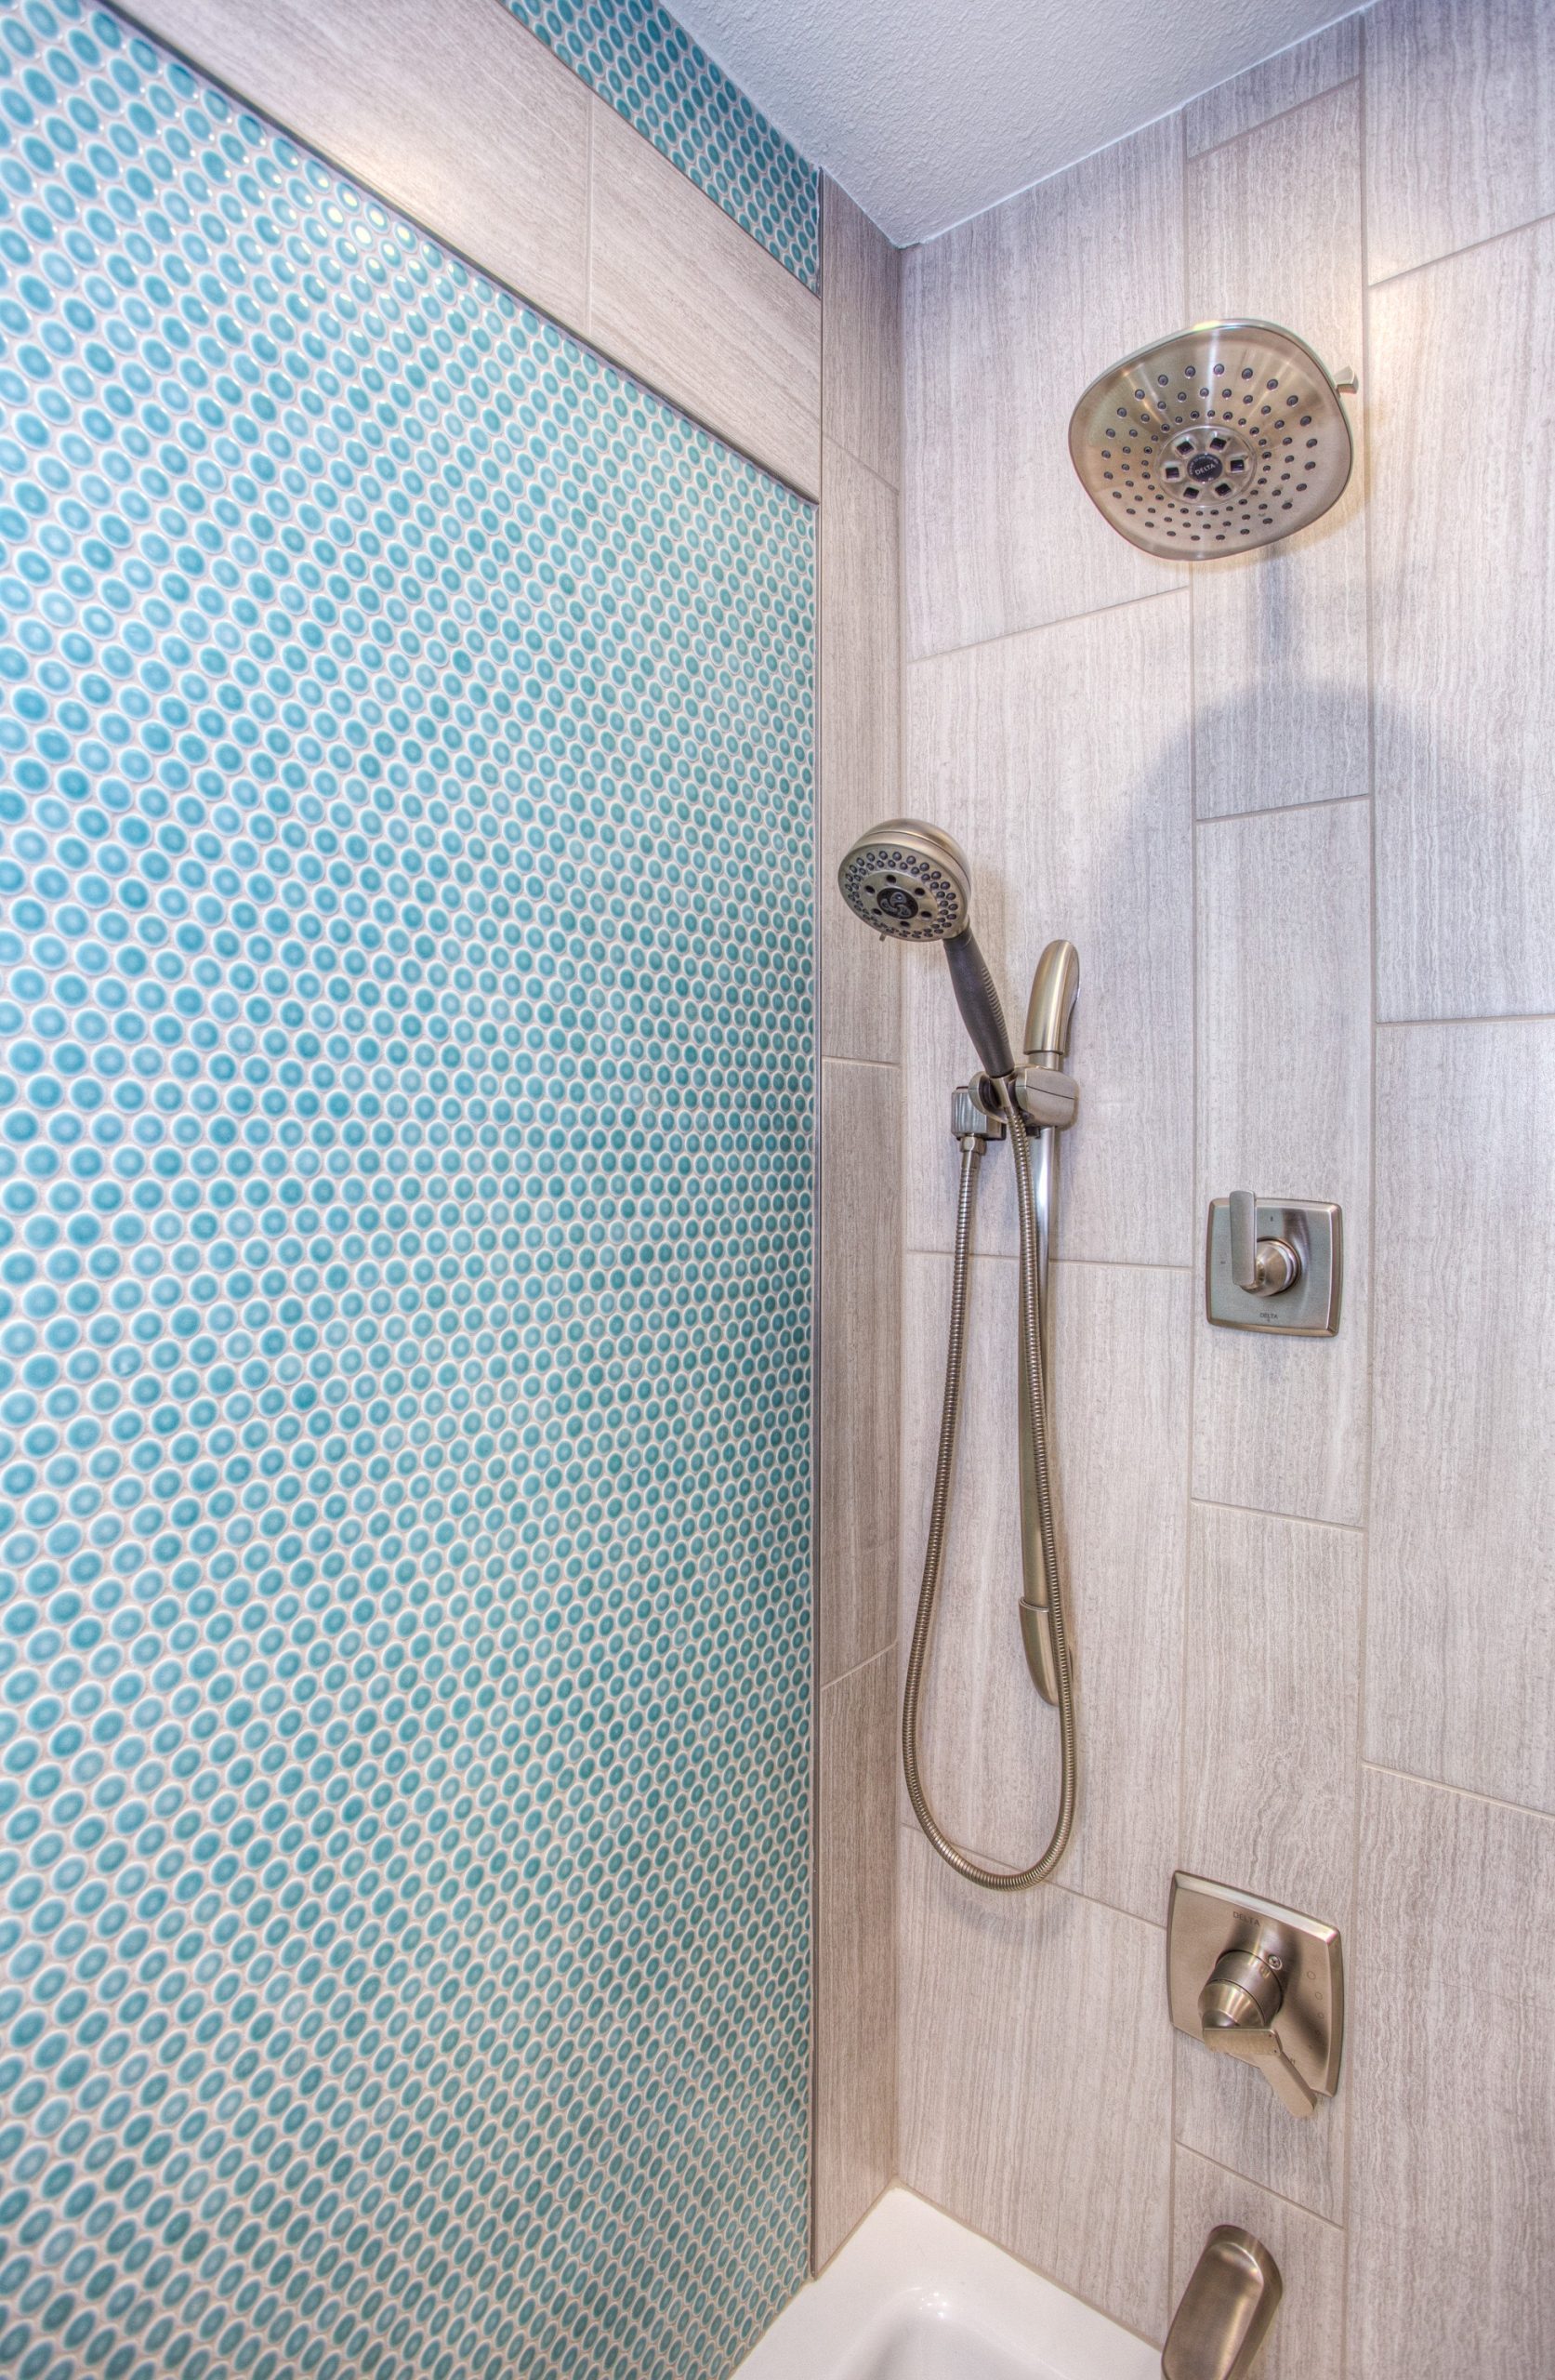 a shower that has tiles as one of the walls